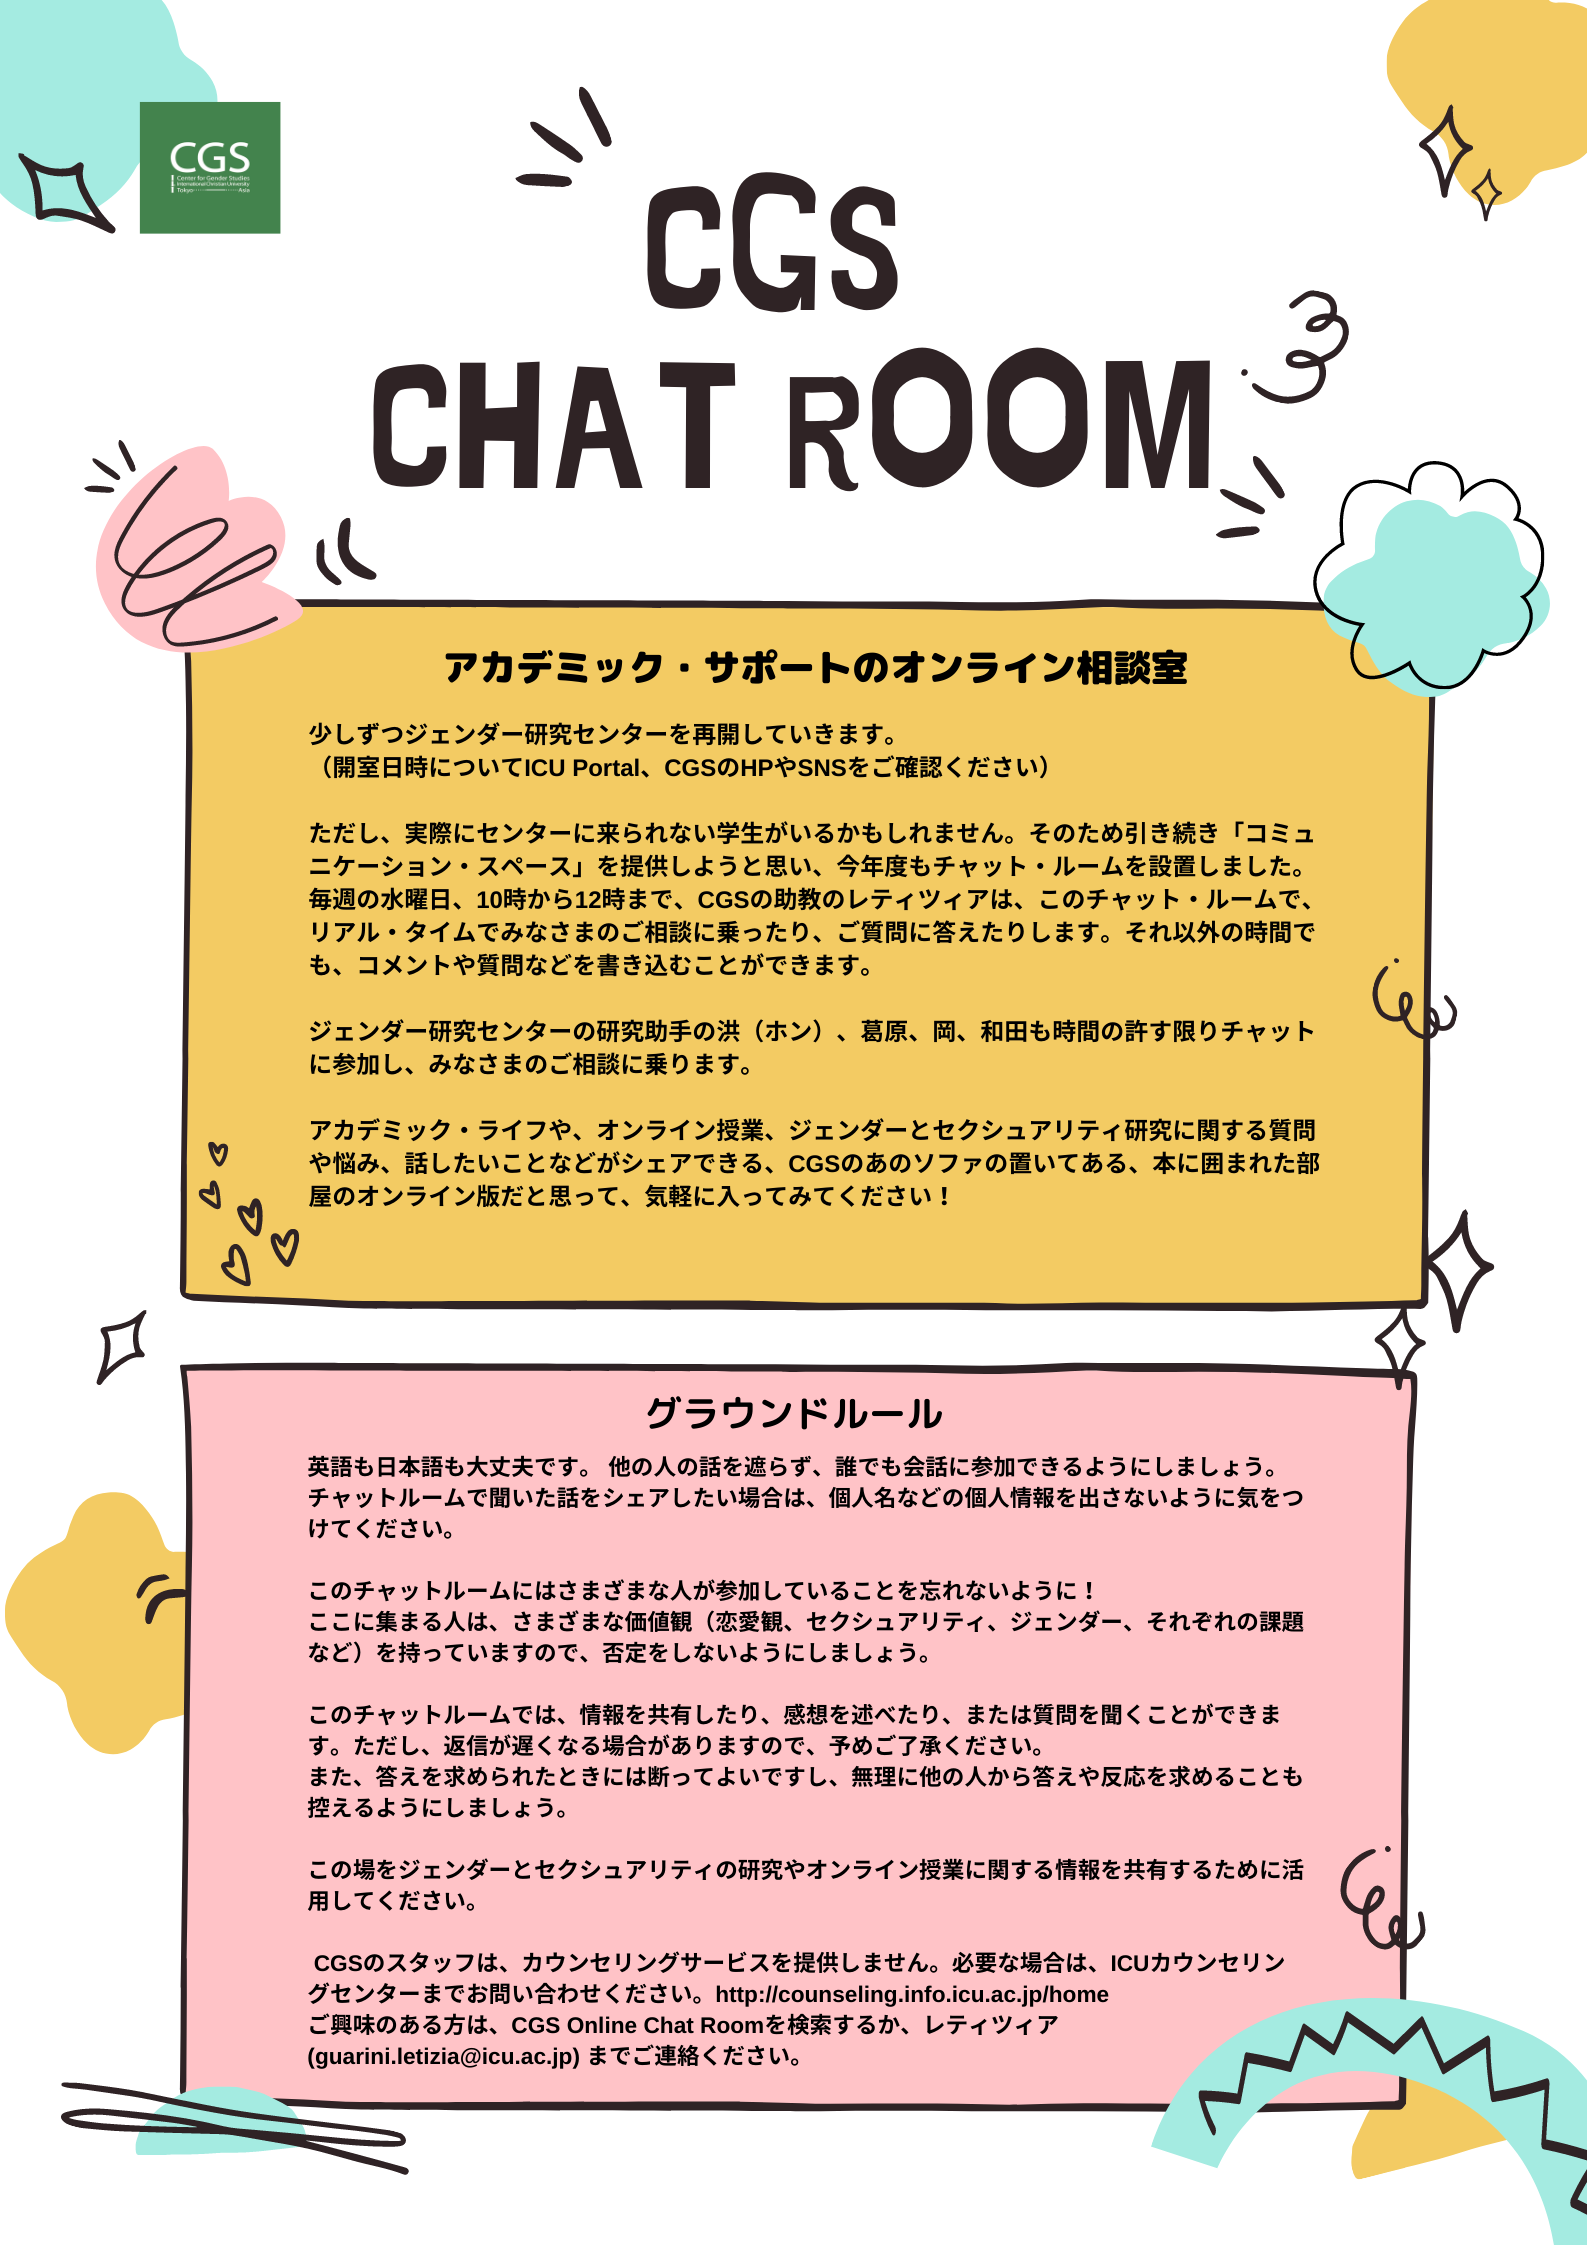 CGS Chat Room Jp.png